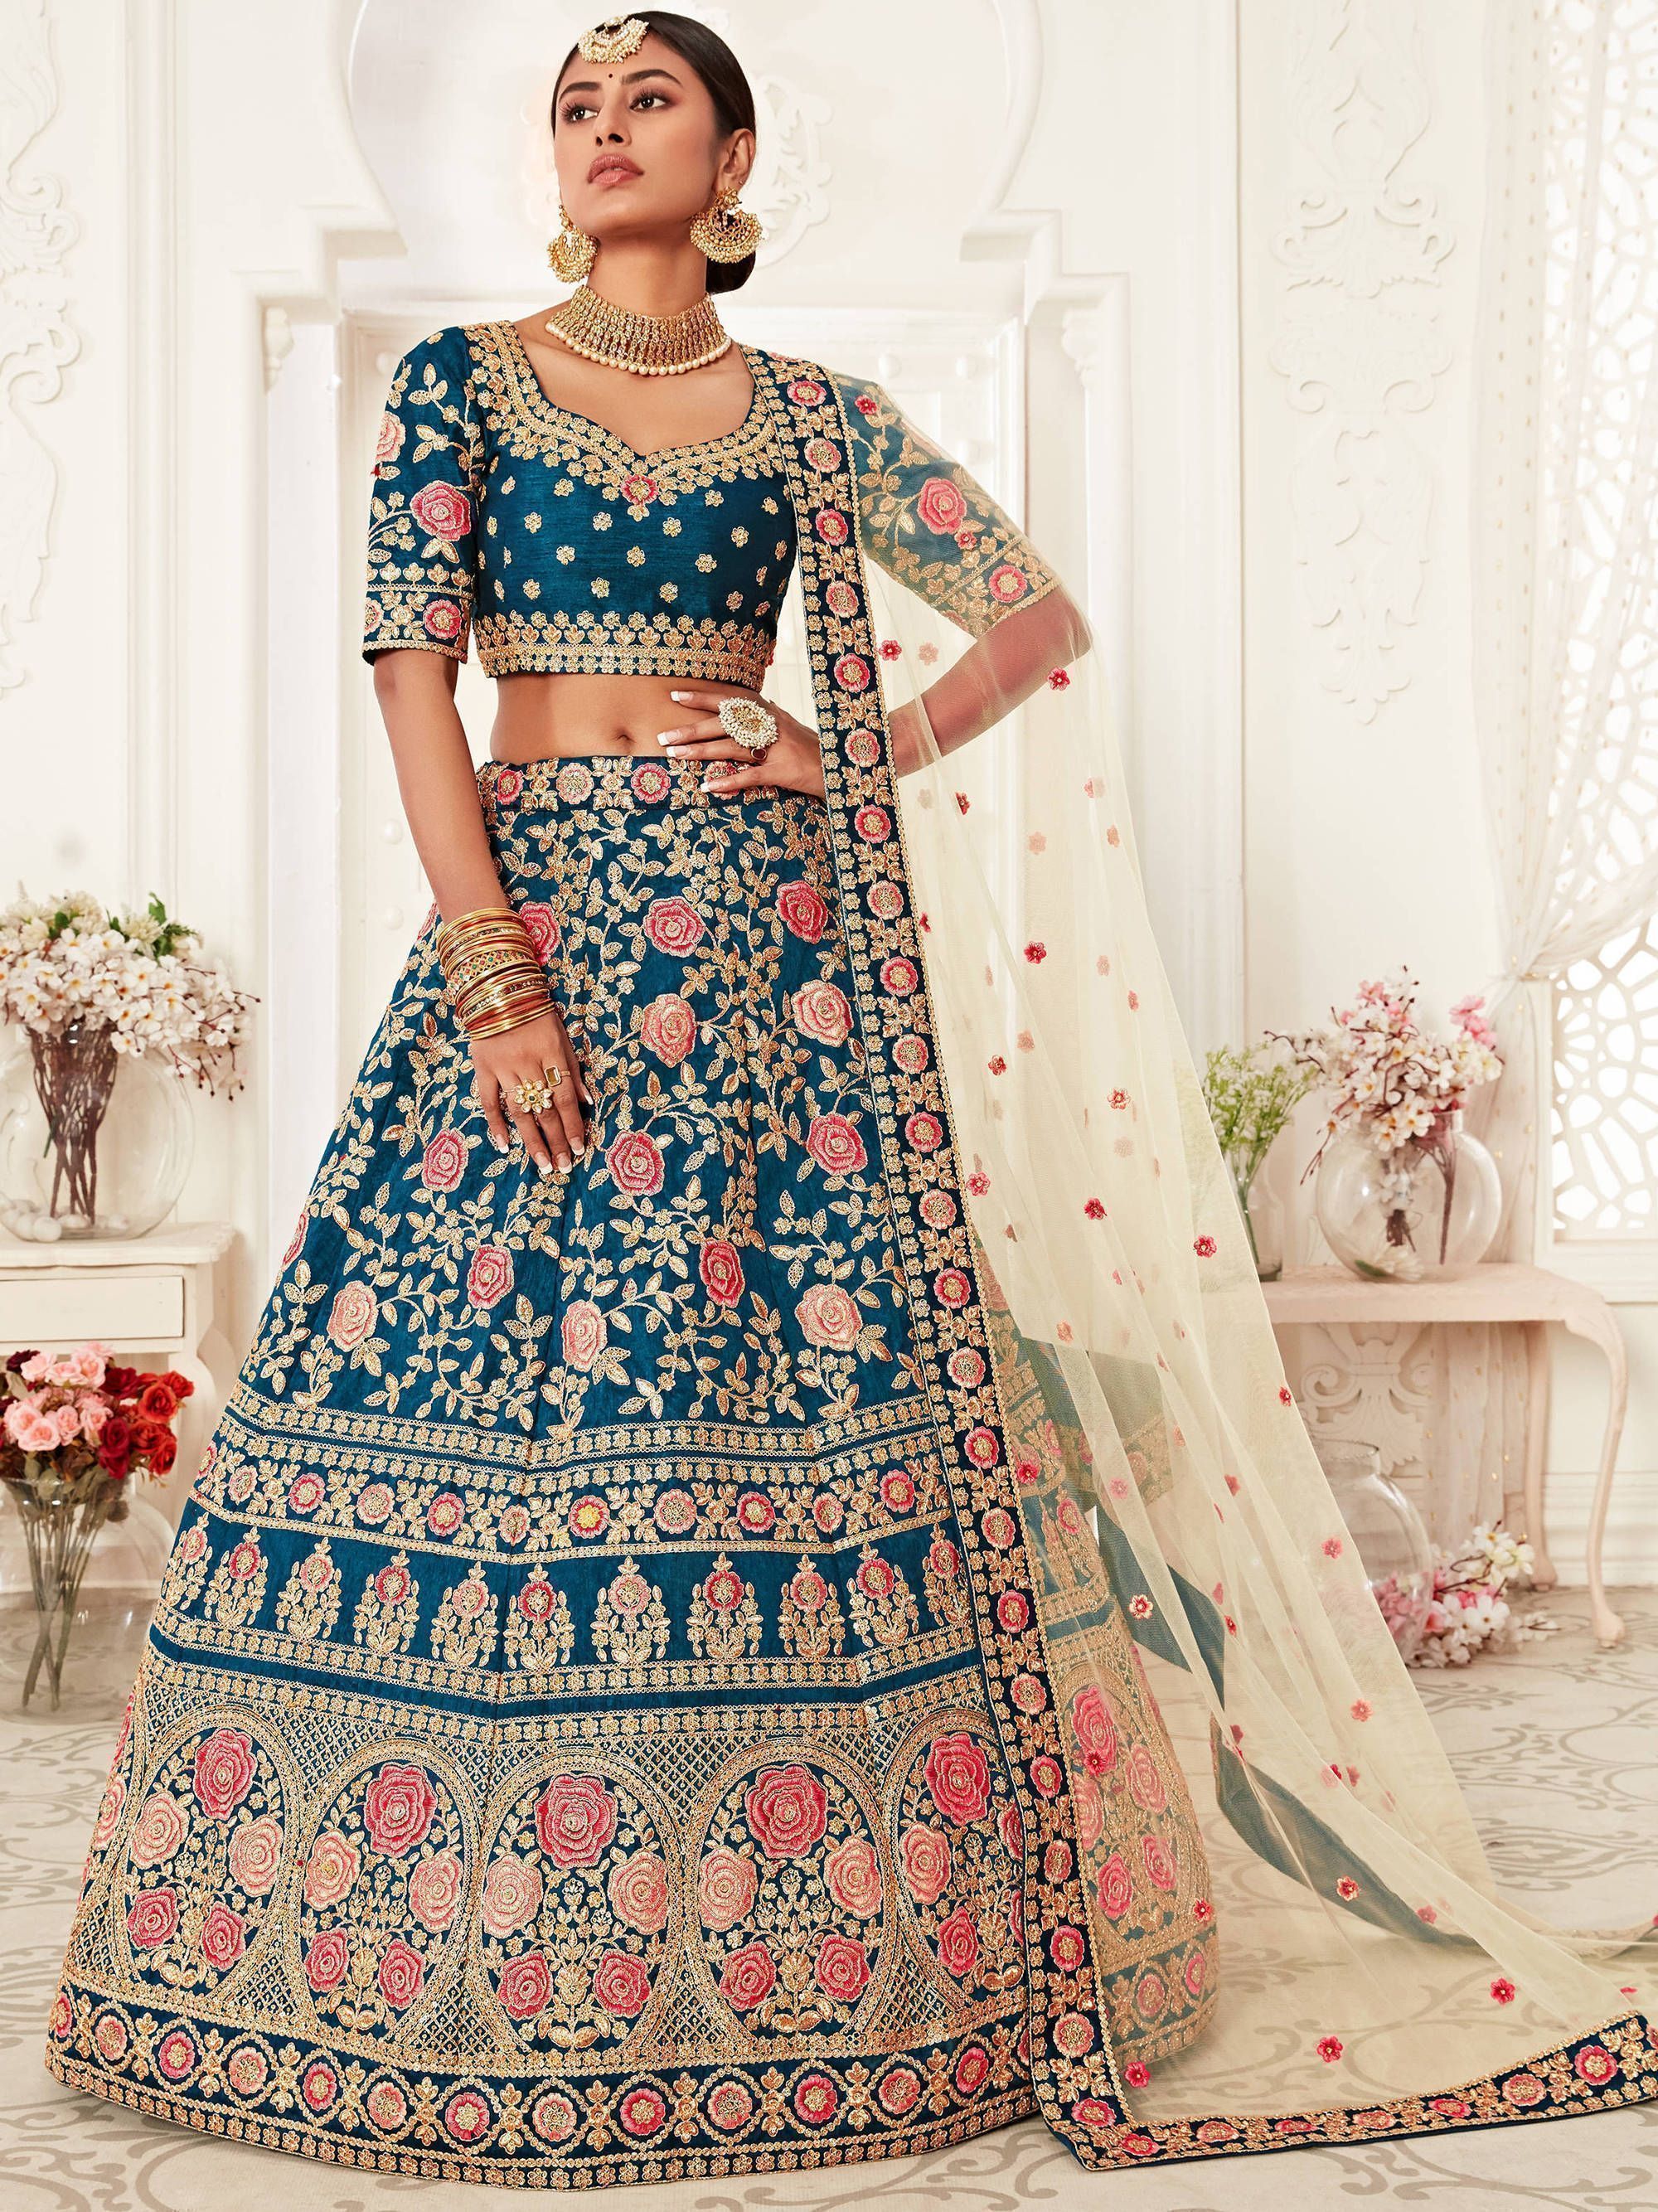 Top Five Unique Wedding Lehenga Which Are Generating Rave Reviews – Aparnaa  Fabrics